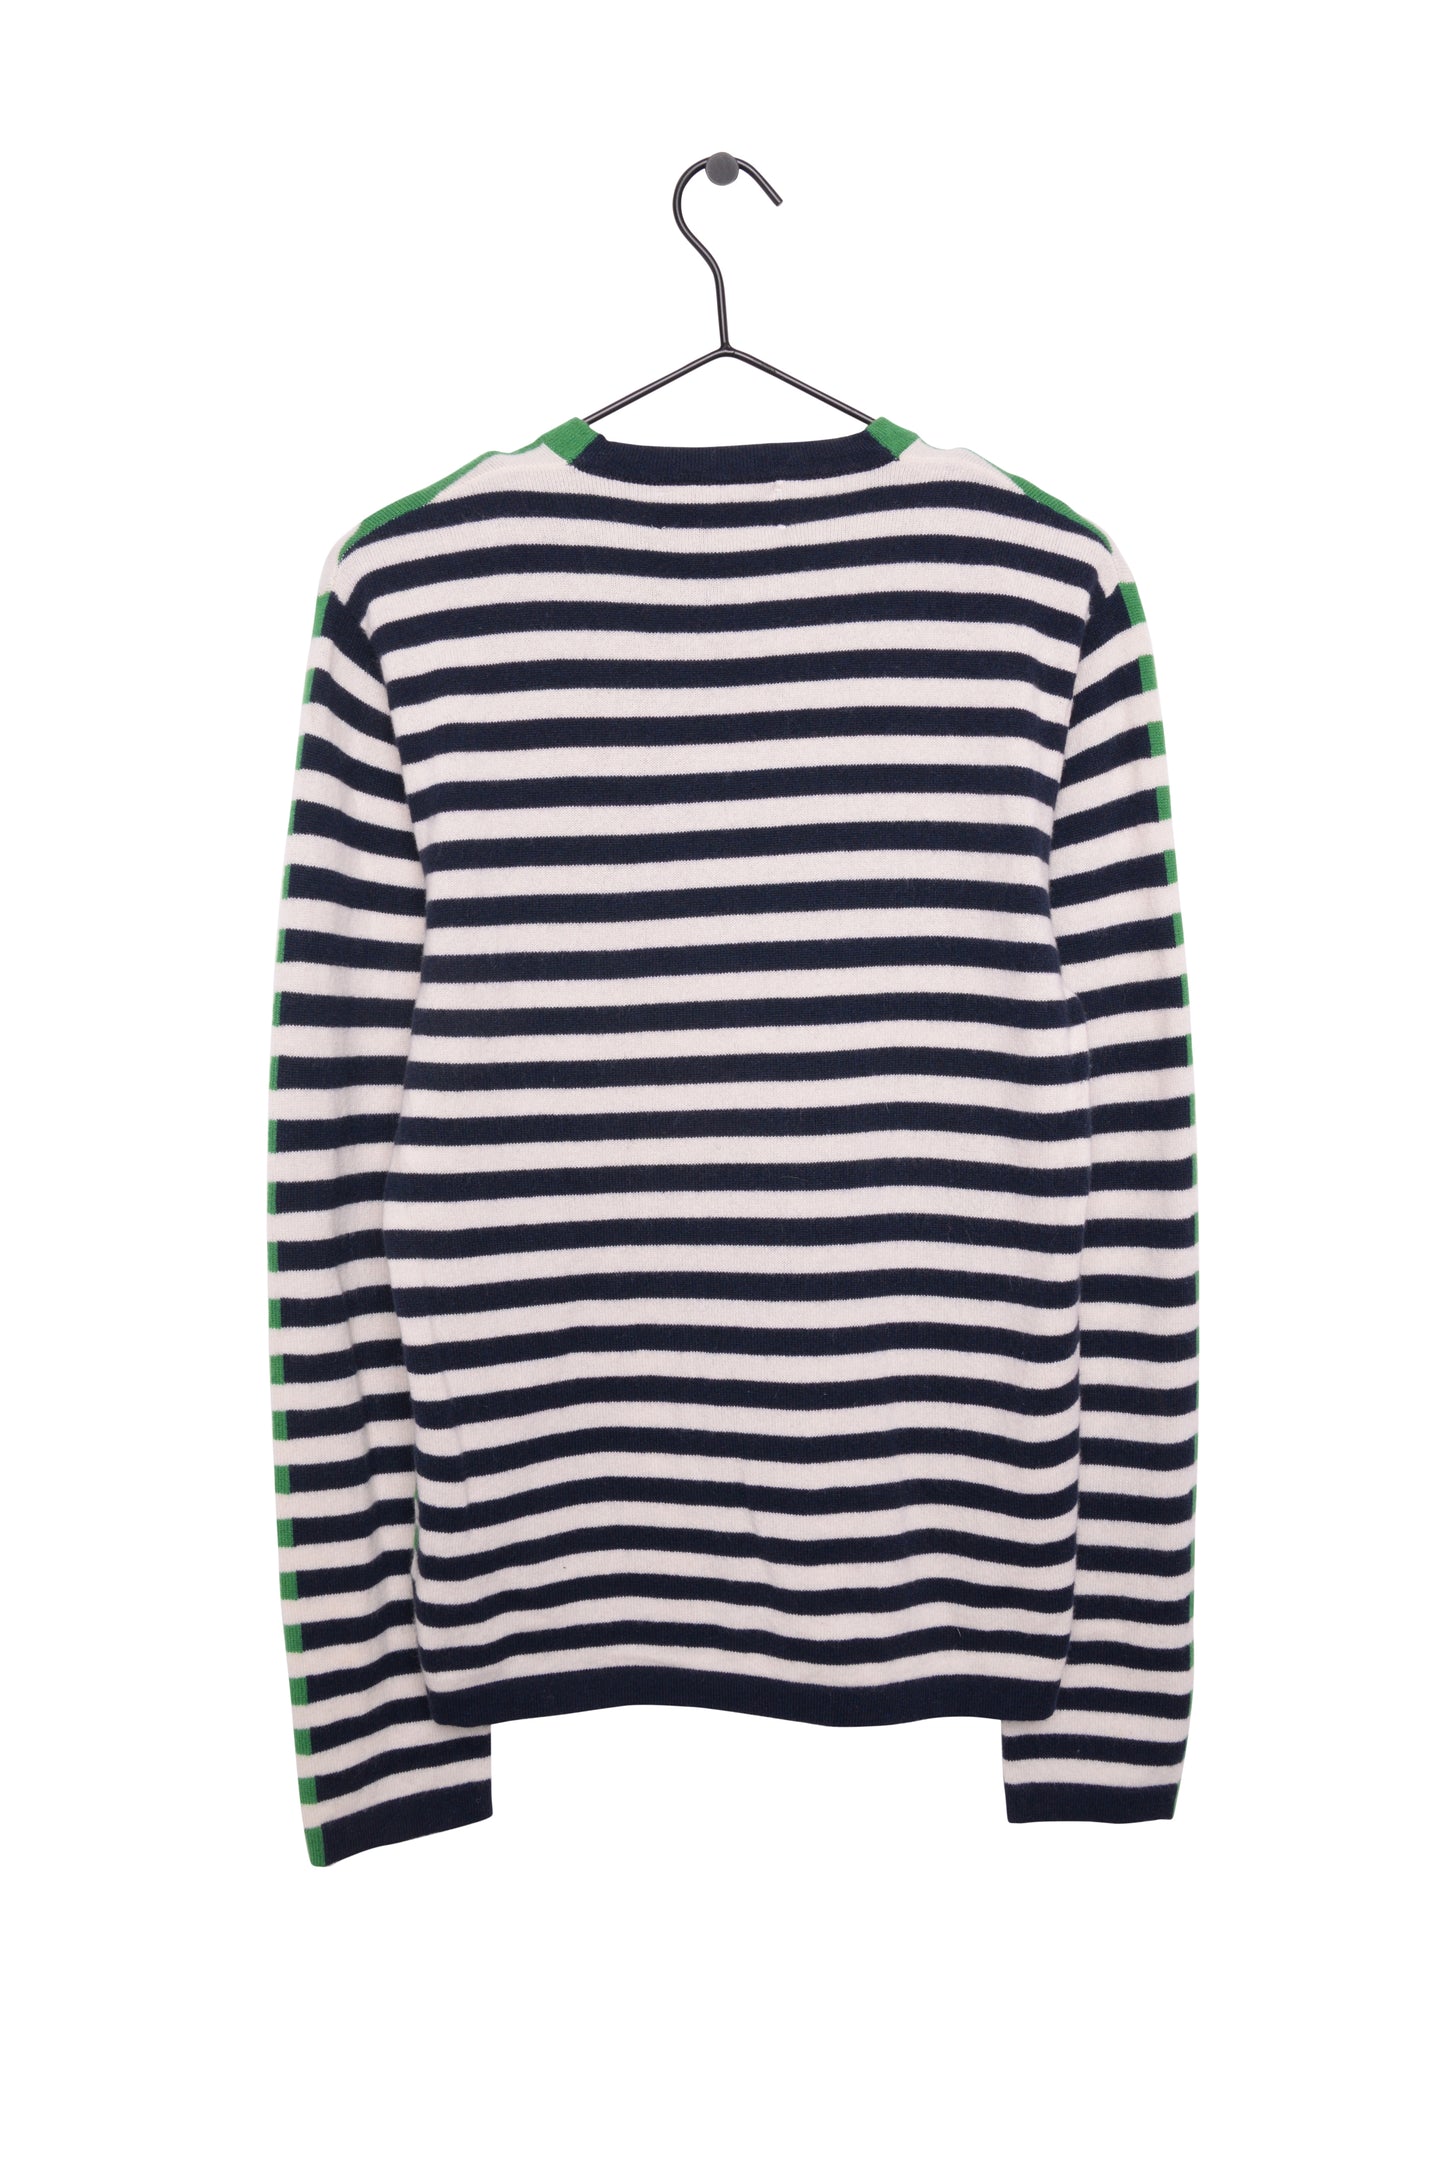 Green/Navy Striped Cashmere Sweater